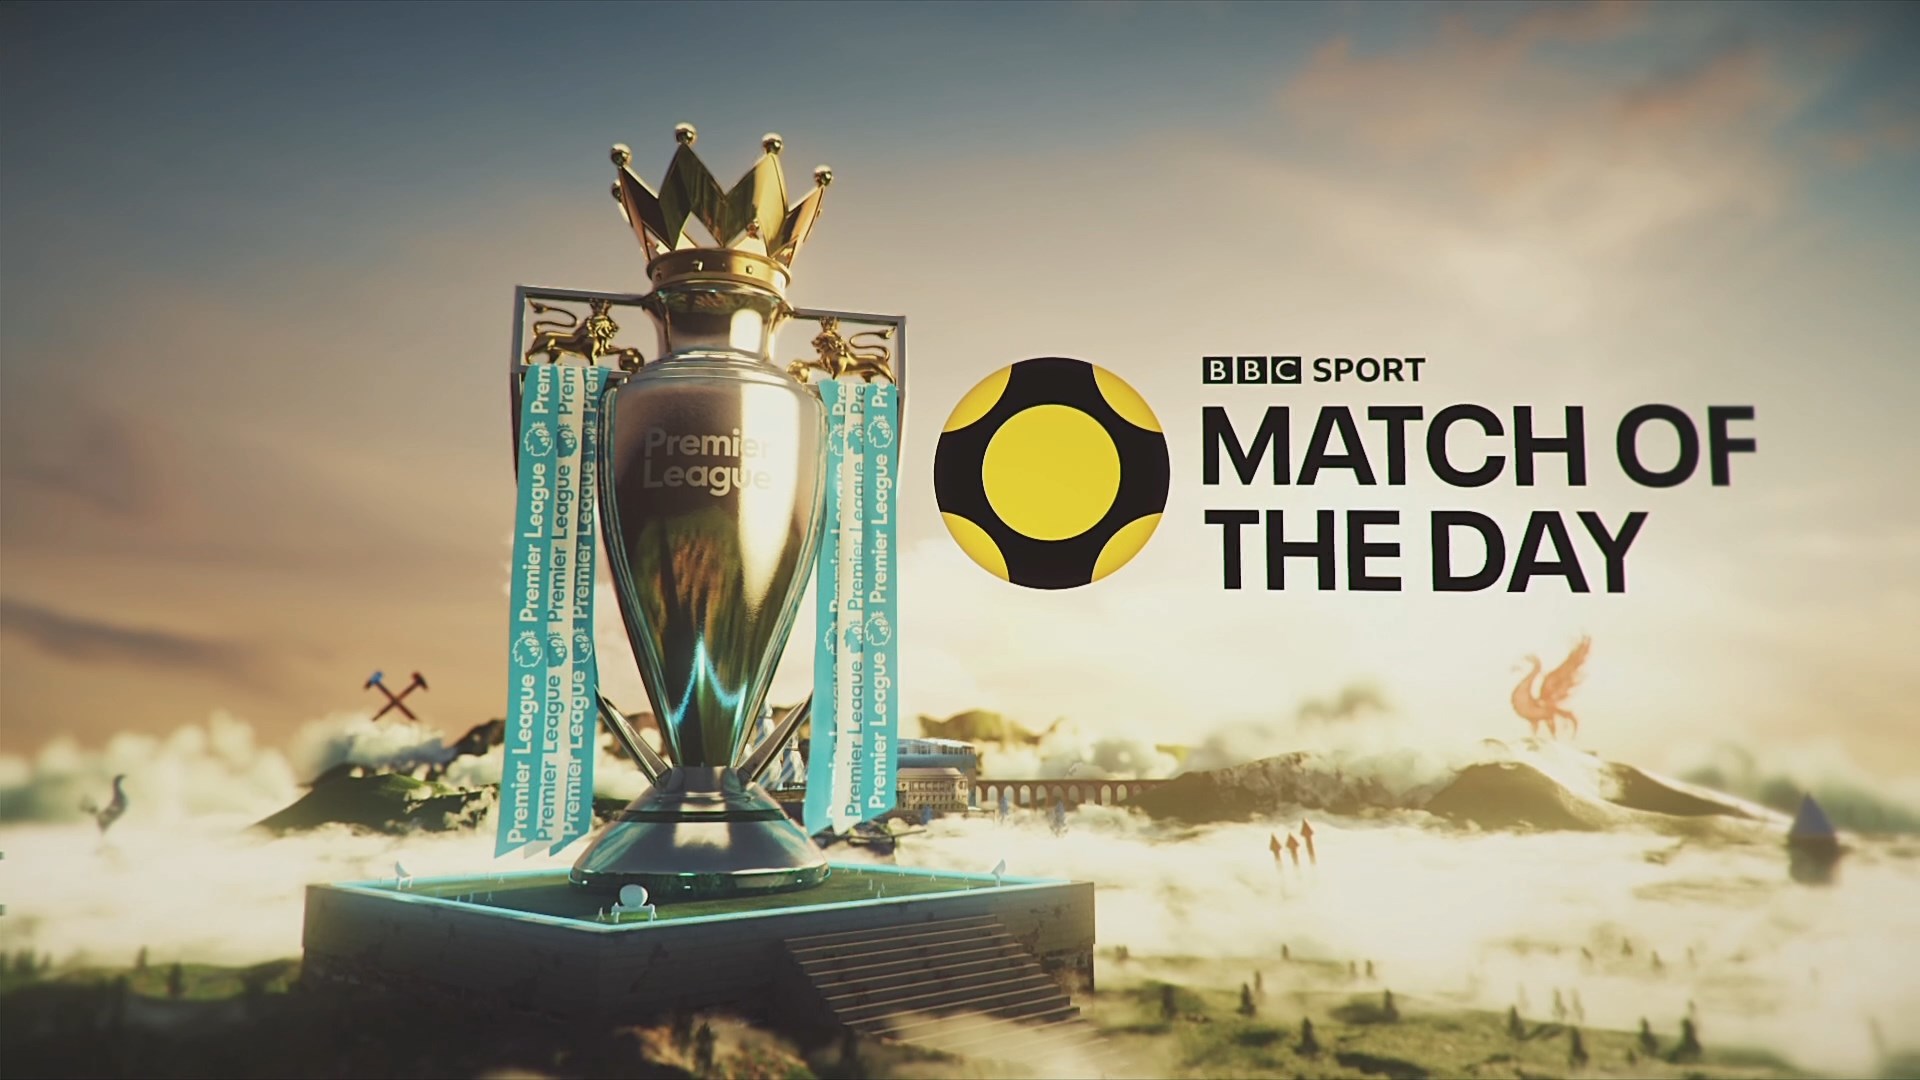 [Highlights1080p] EPL 21/22 Highlights Match of the Day Matchday